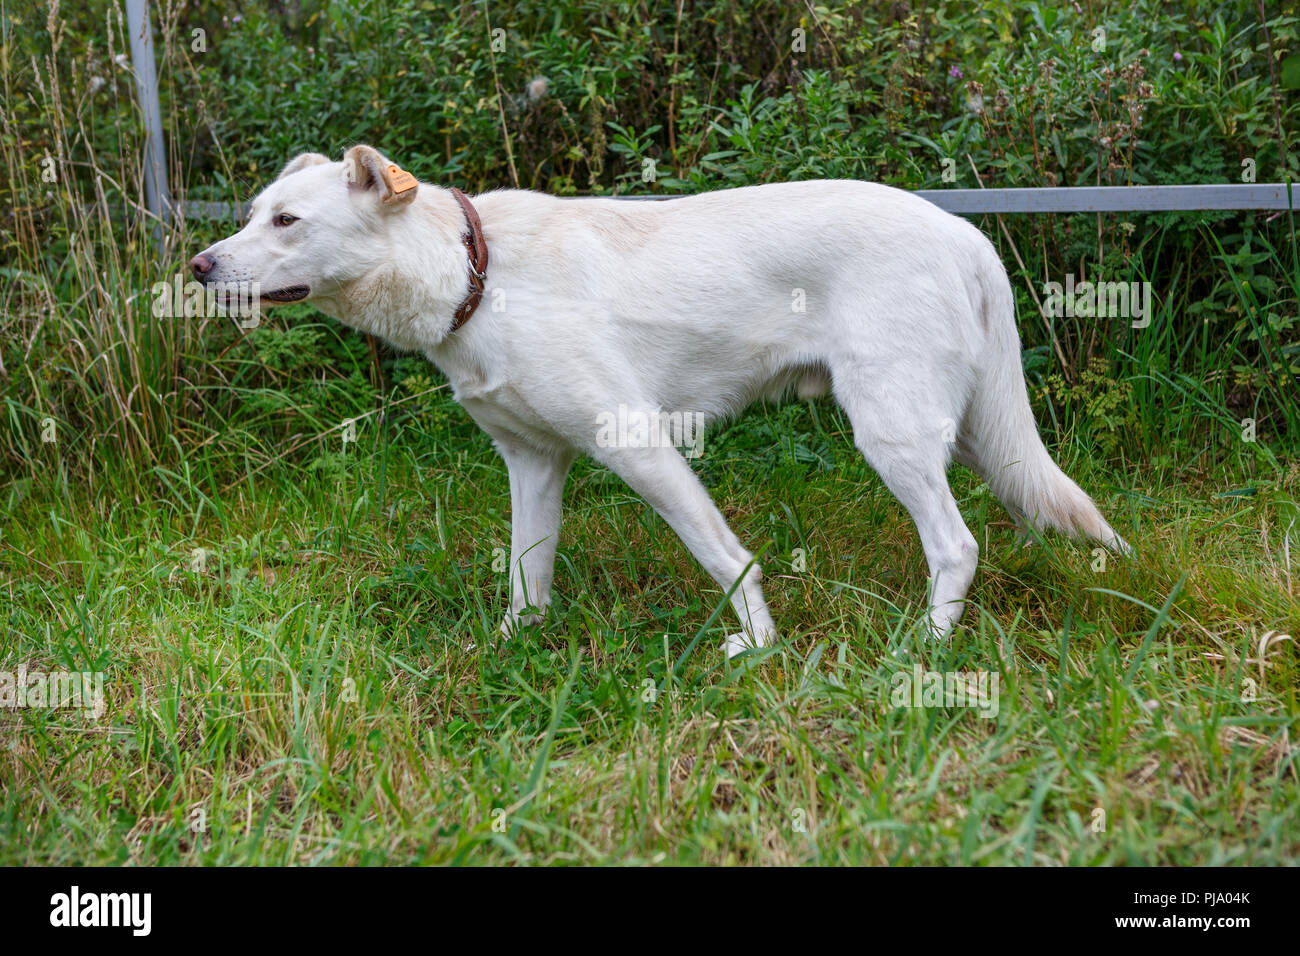 Large white dog with a tag on sterilization Stock Photo